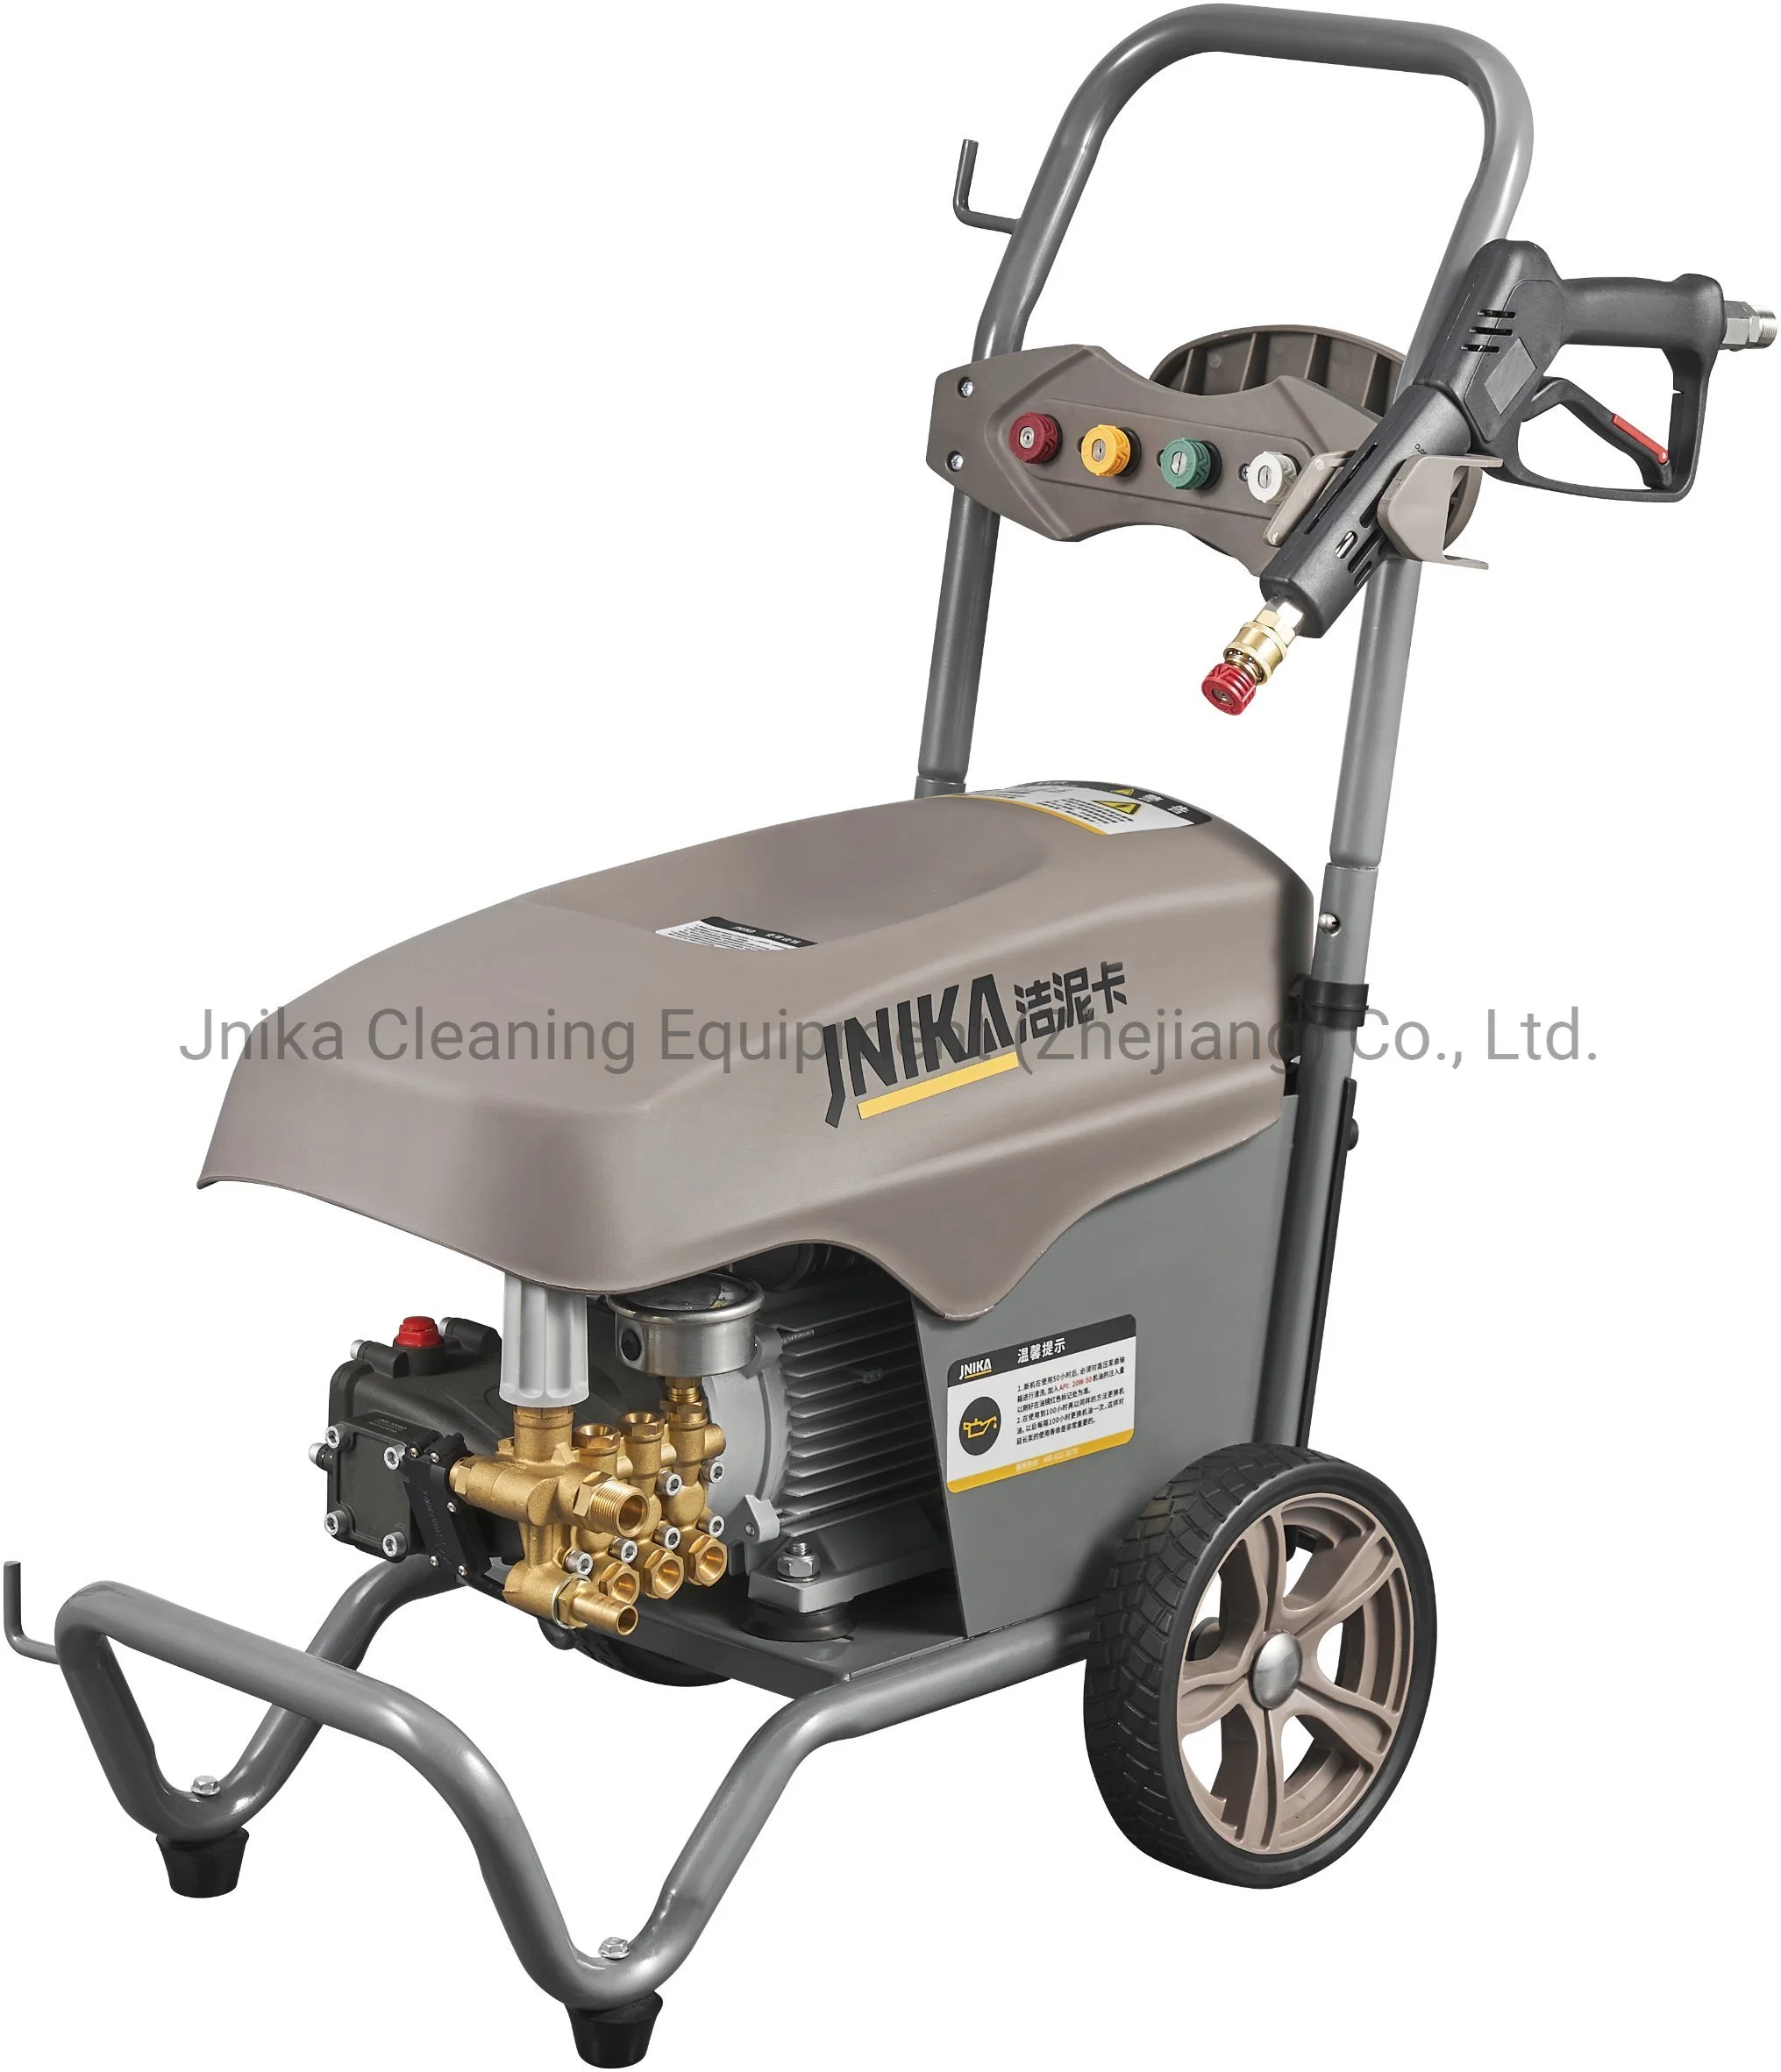 Jnk-19s2 2.4kw Commercial High Pressure Washer Car Washer Industrial Washer